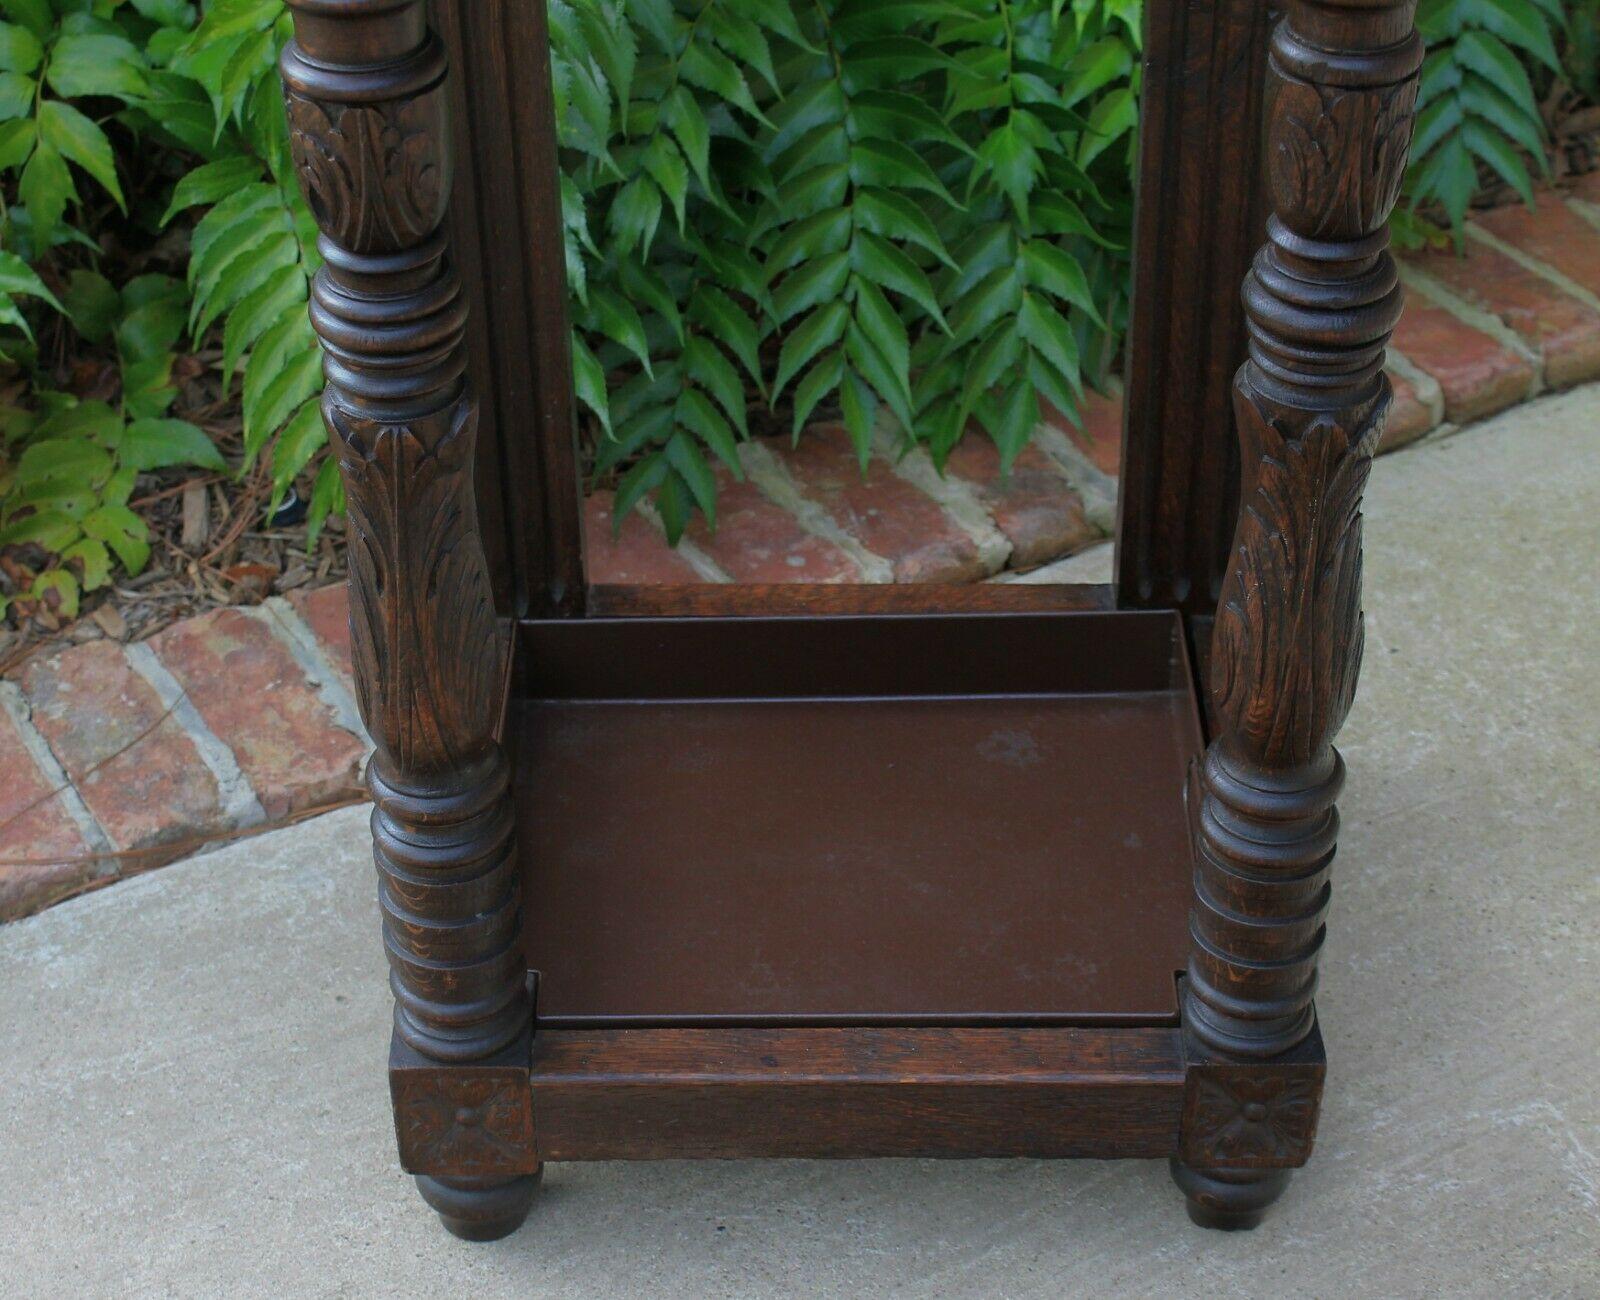 19th Century Antique English Oak Gothic Umbrella Cane Stick Stand Hall Tree Entry Foyer Stand